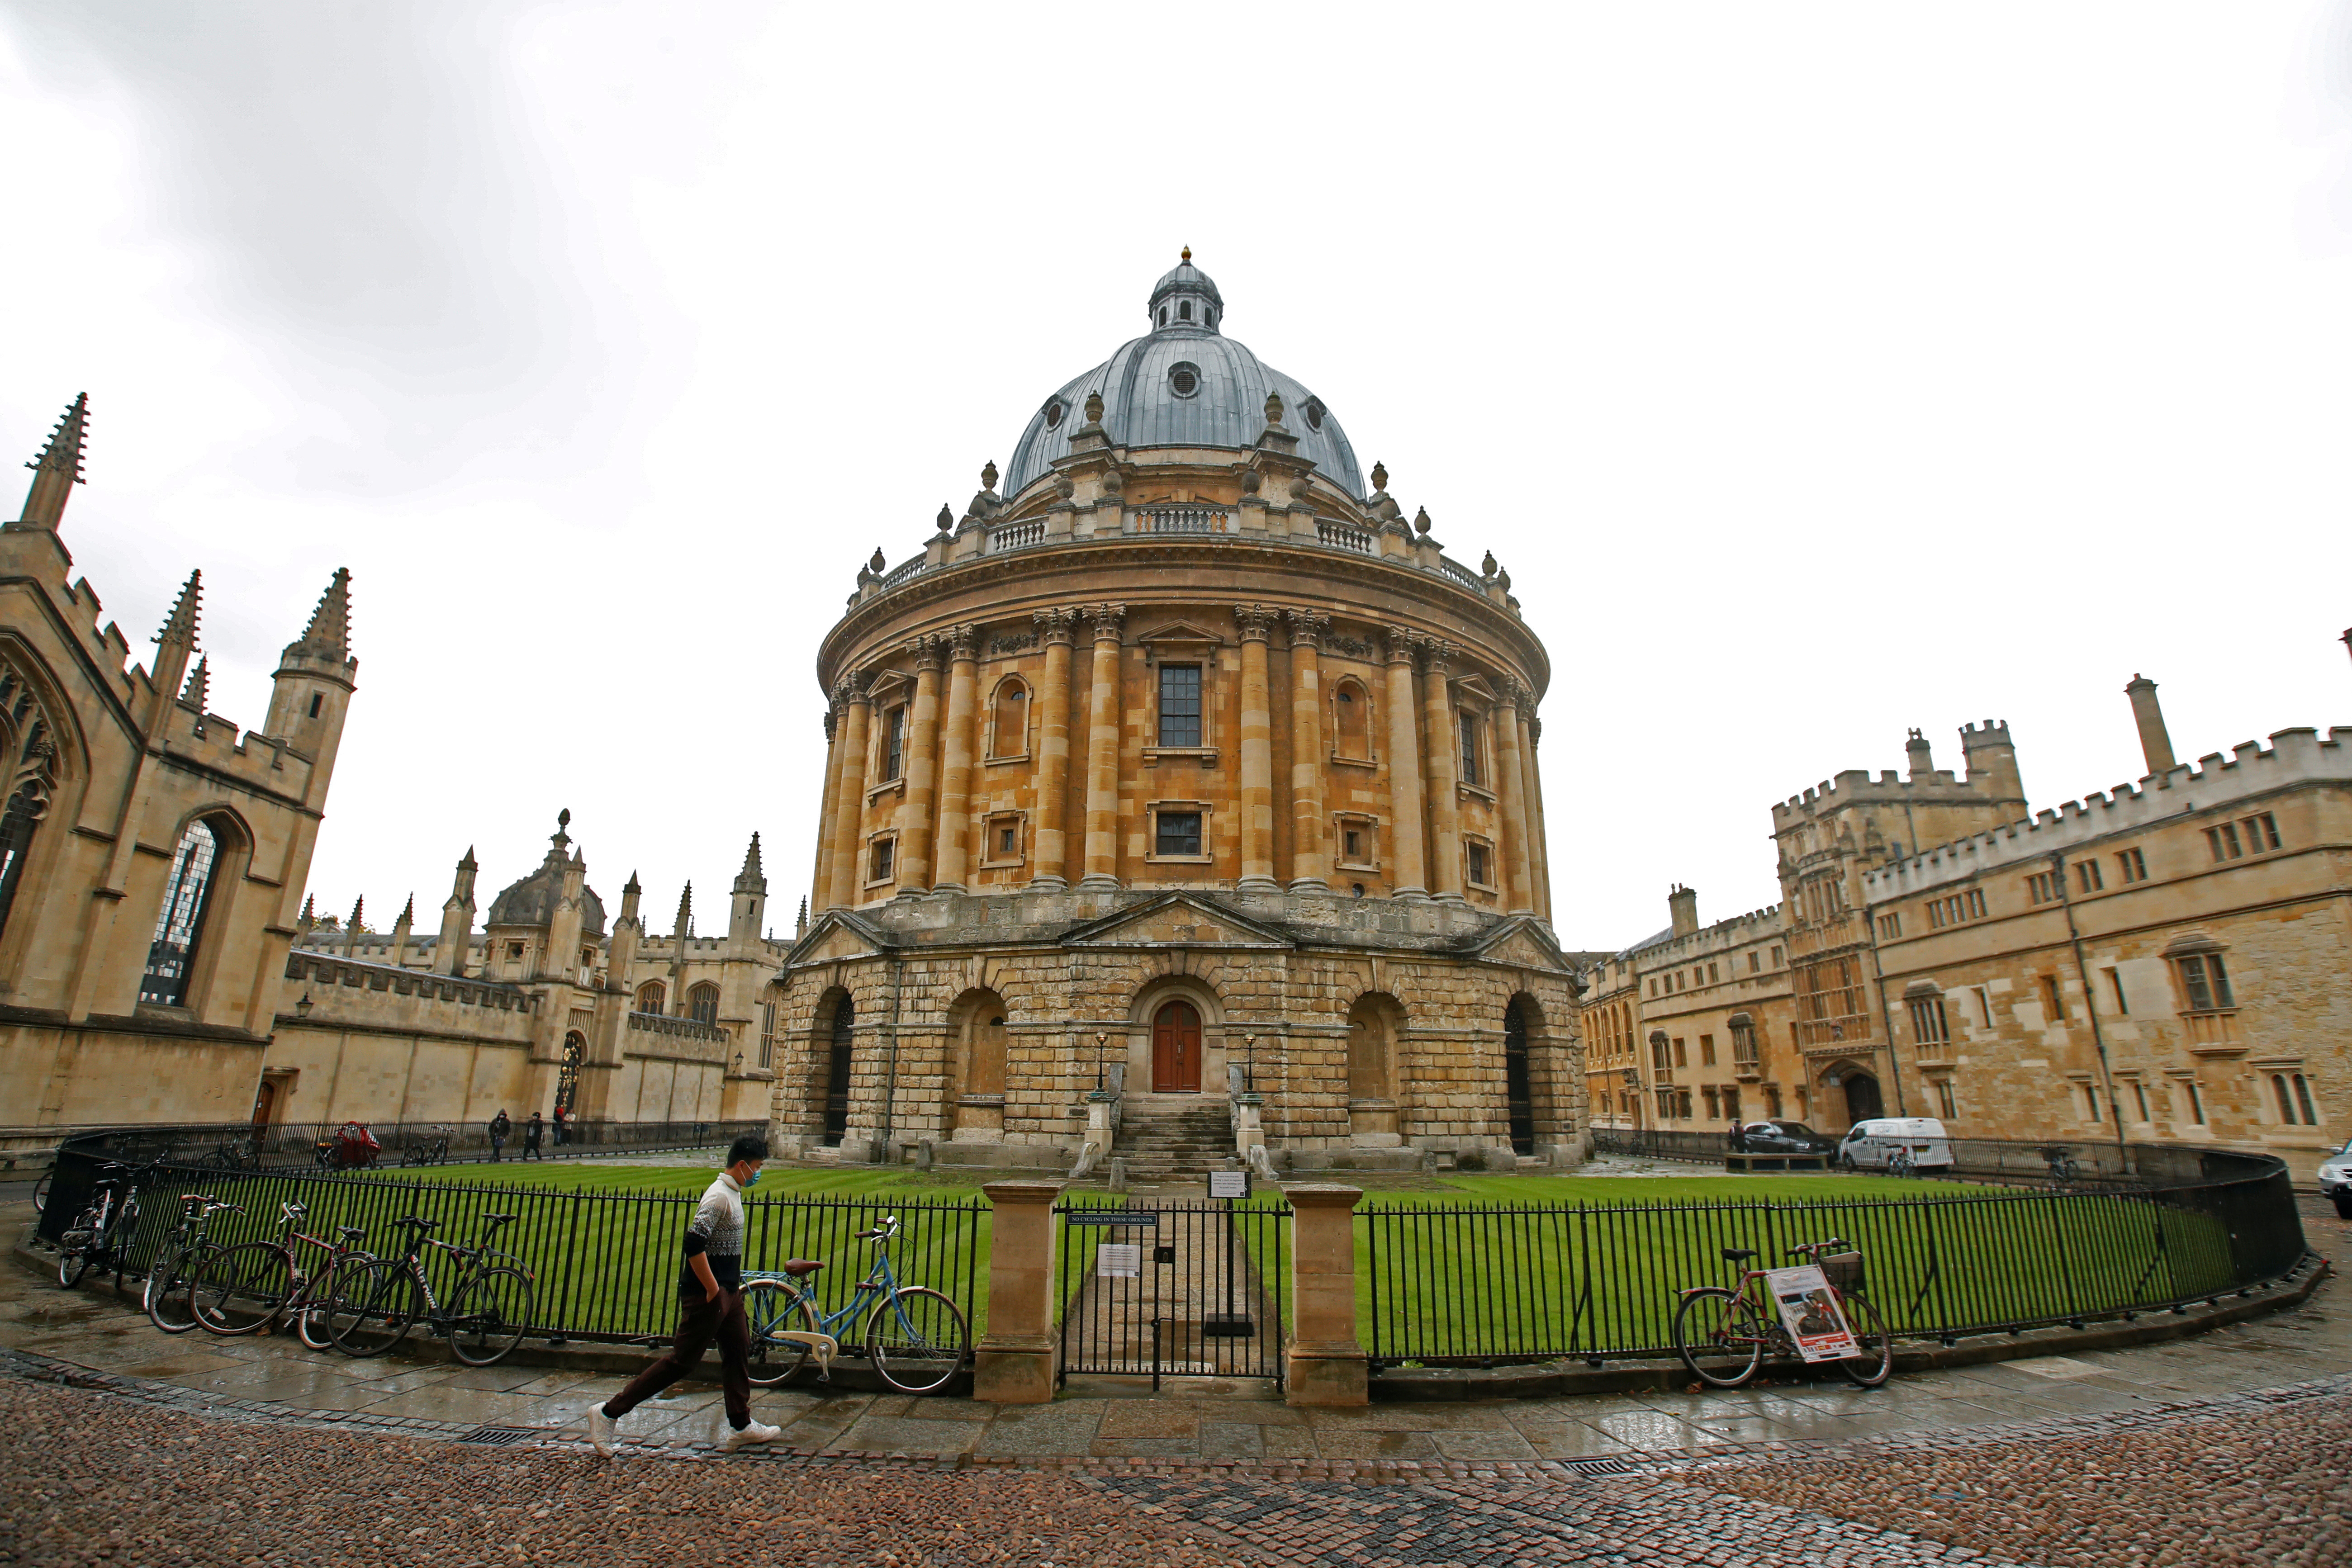 A man walks in front of the buildings of Oxford University